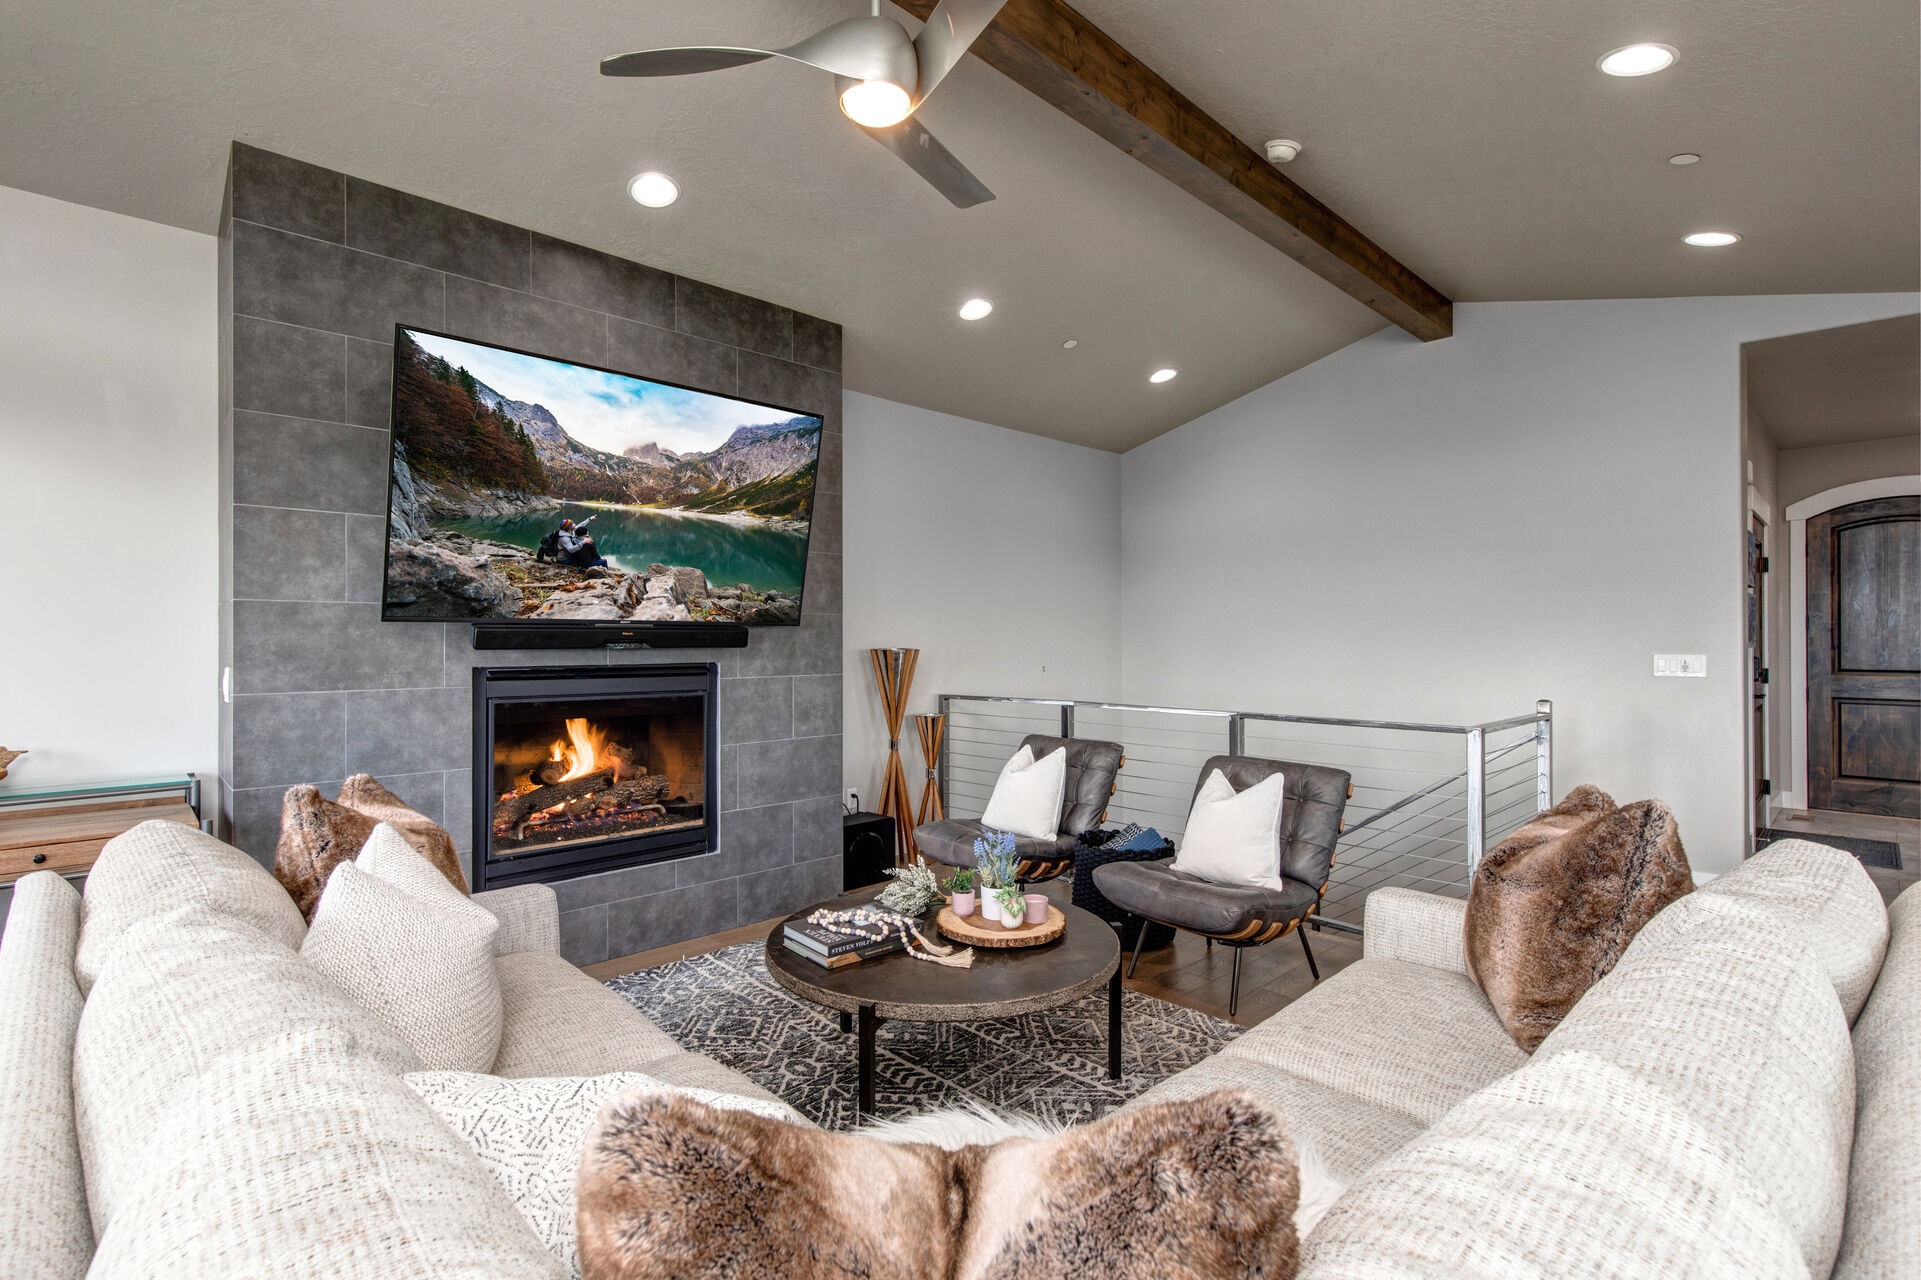 Living Room with plush oversized sectional sofa, smart tv, gas fireplace, and private deck access